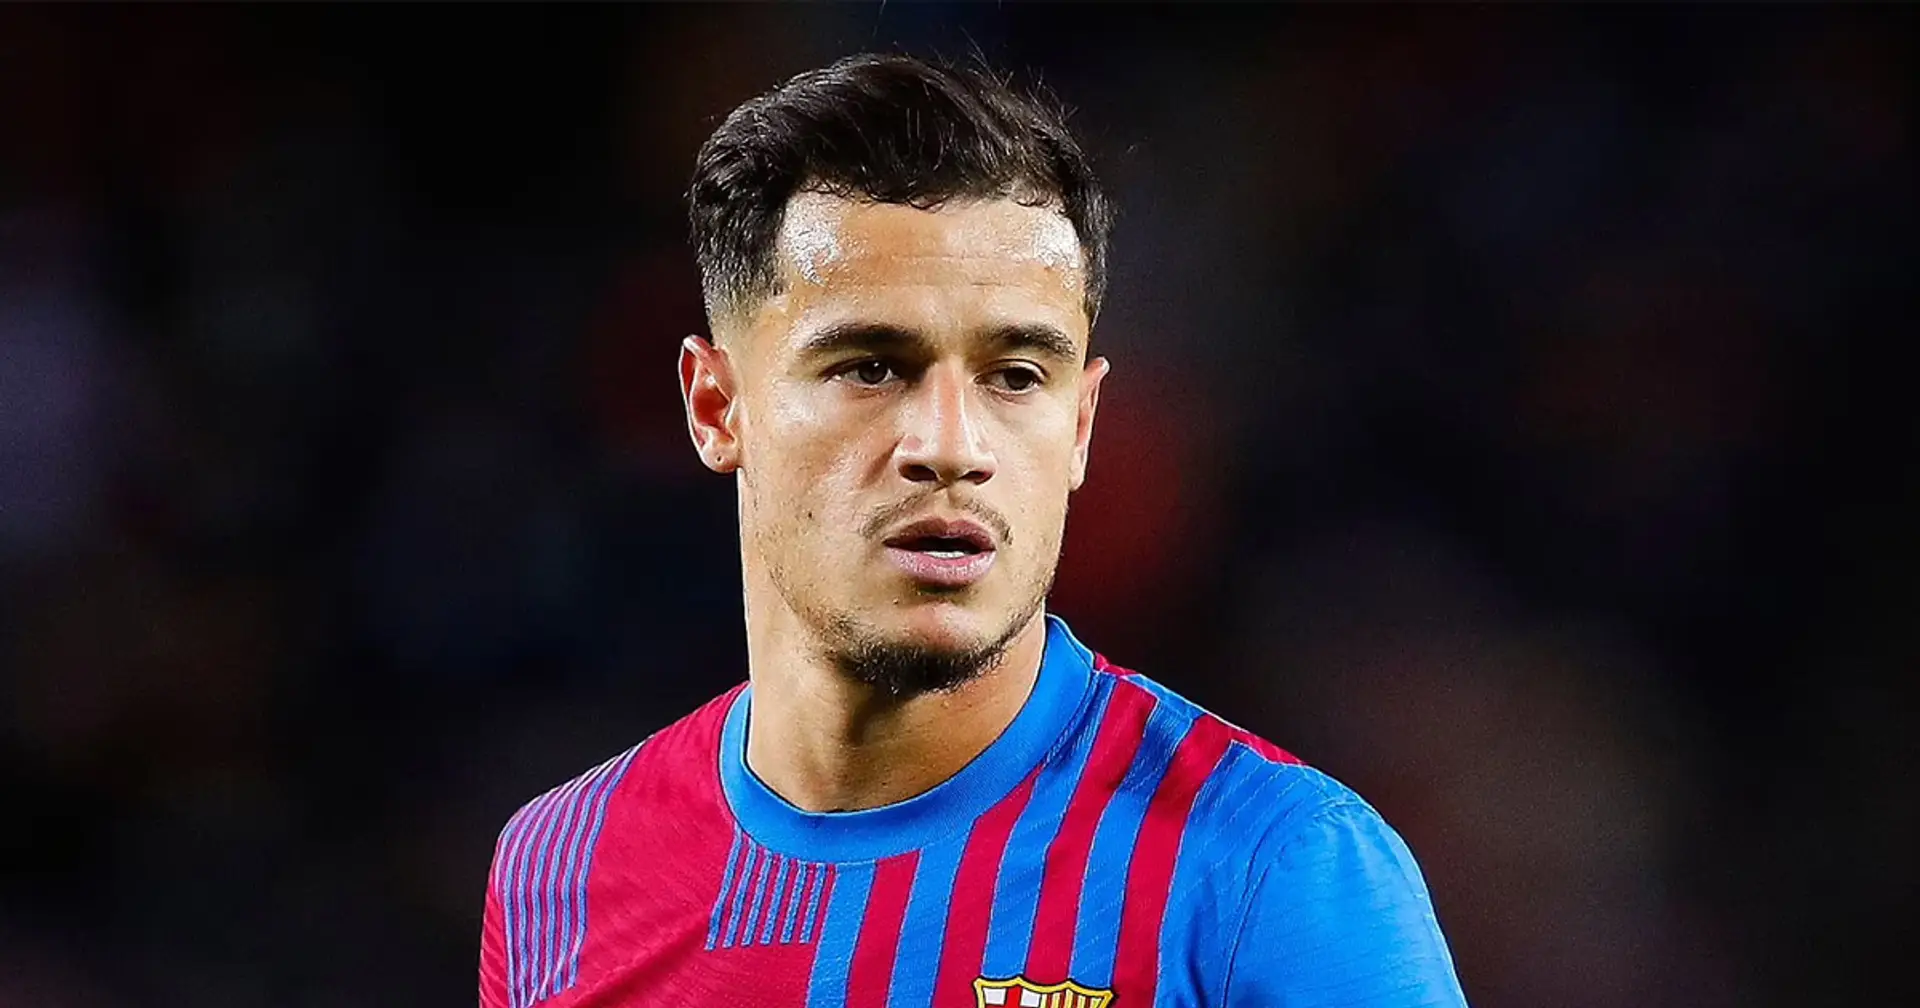 Salary, length and more key details of Coutinho's potential loan to Aston Villa revealed